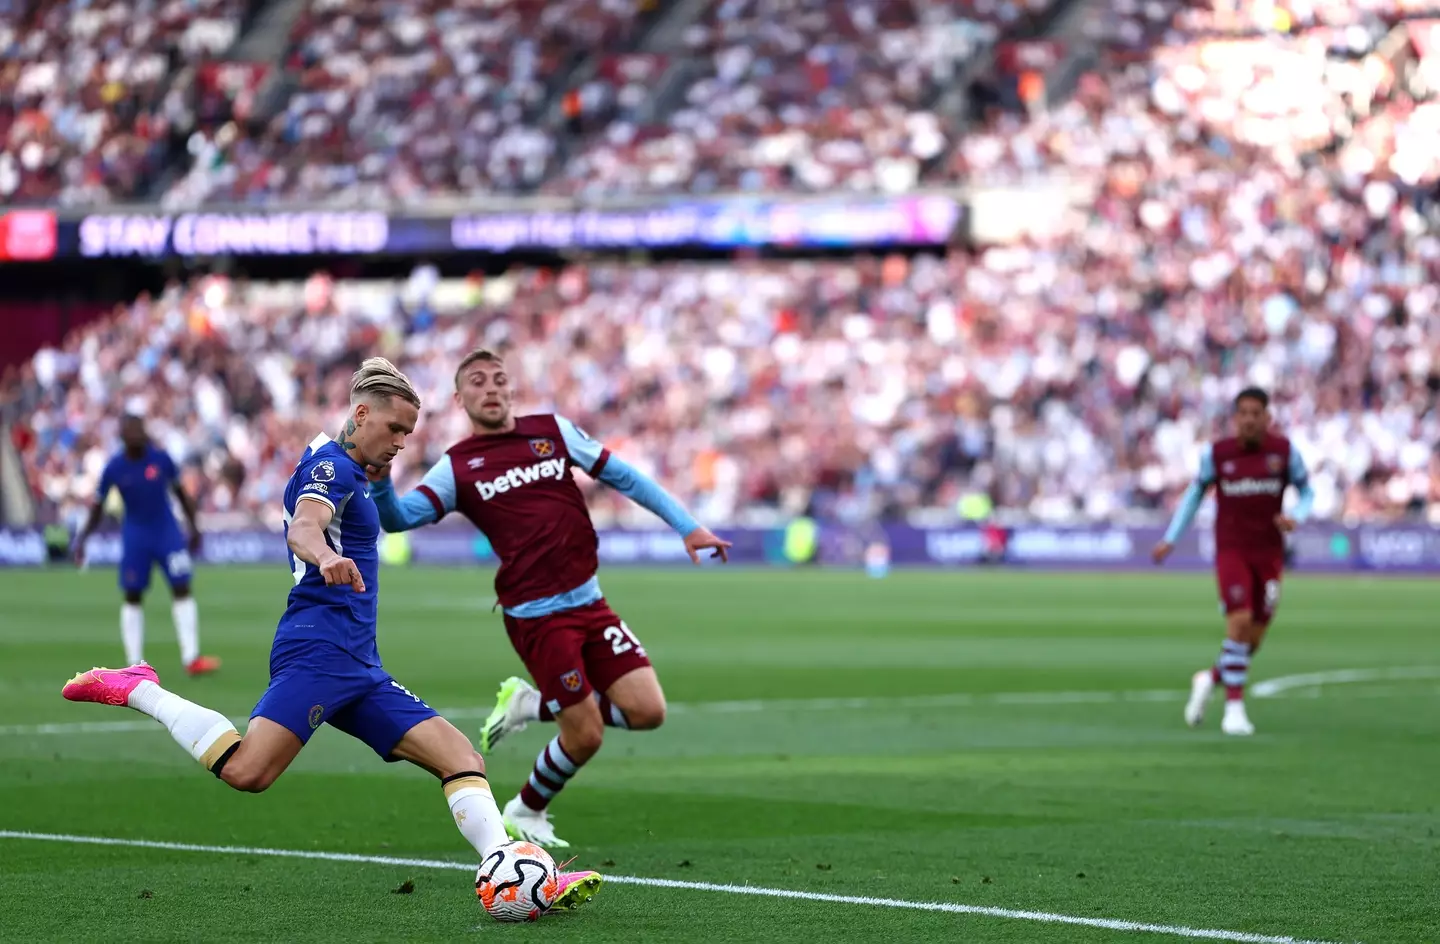 Mykhailo Mudryk in action for Chelsea against West Ham United. Image: Getty